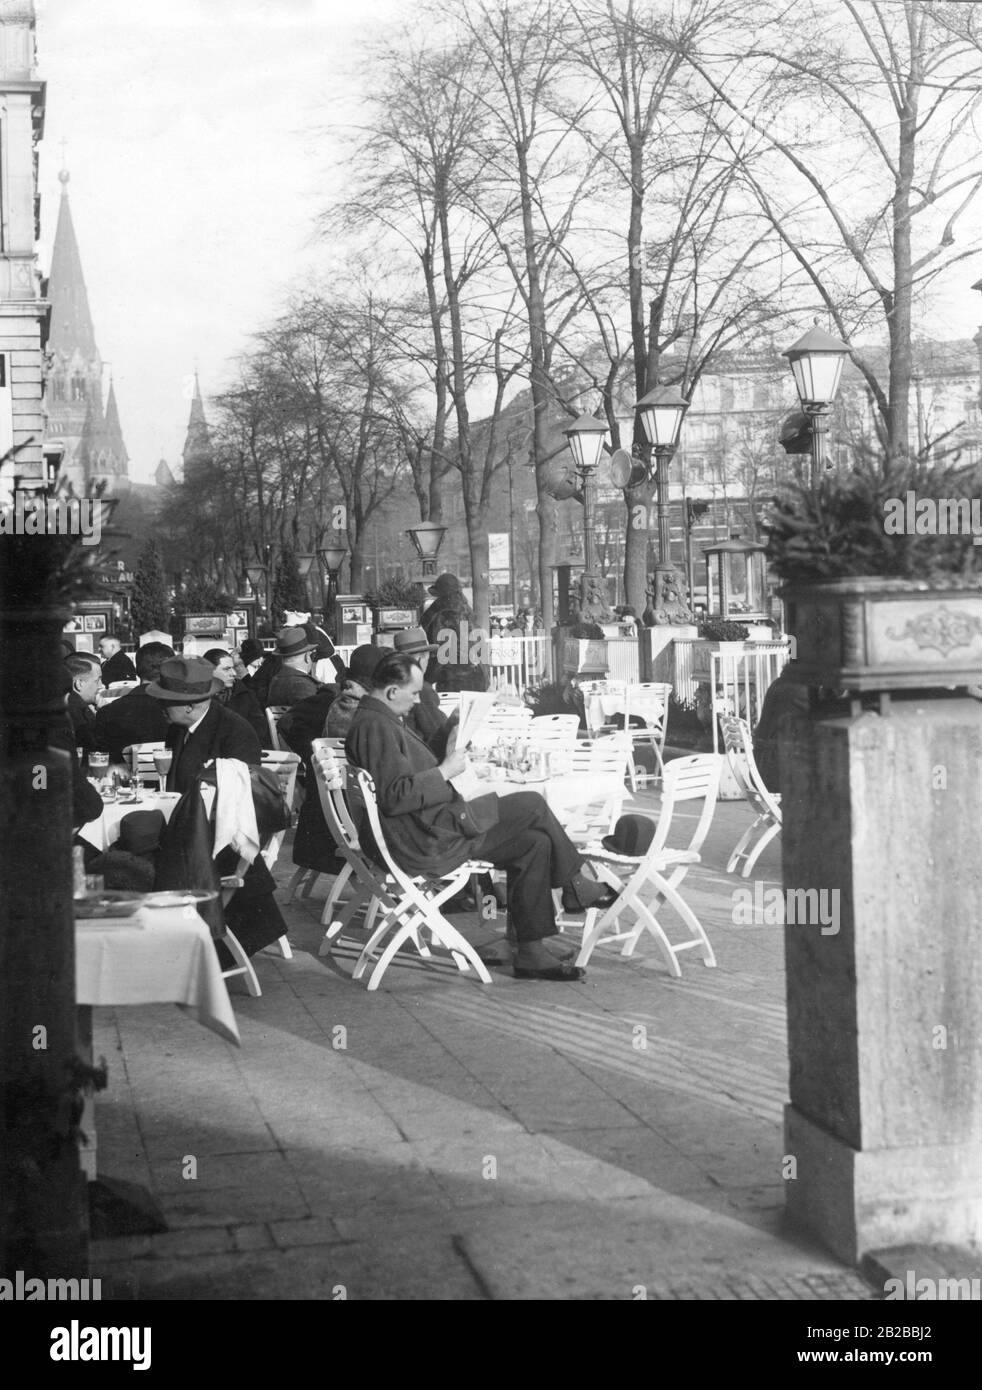 Guests sit in a street cafe in Berlin on the Kurfuerstendamm. It is photographed through two columns with plant troughs on them. He wears gaiters over his shoes.  In the background the Kaiser Wilhelm Memorial Church can be seen. Stock Photo